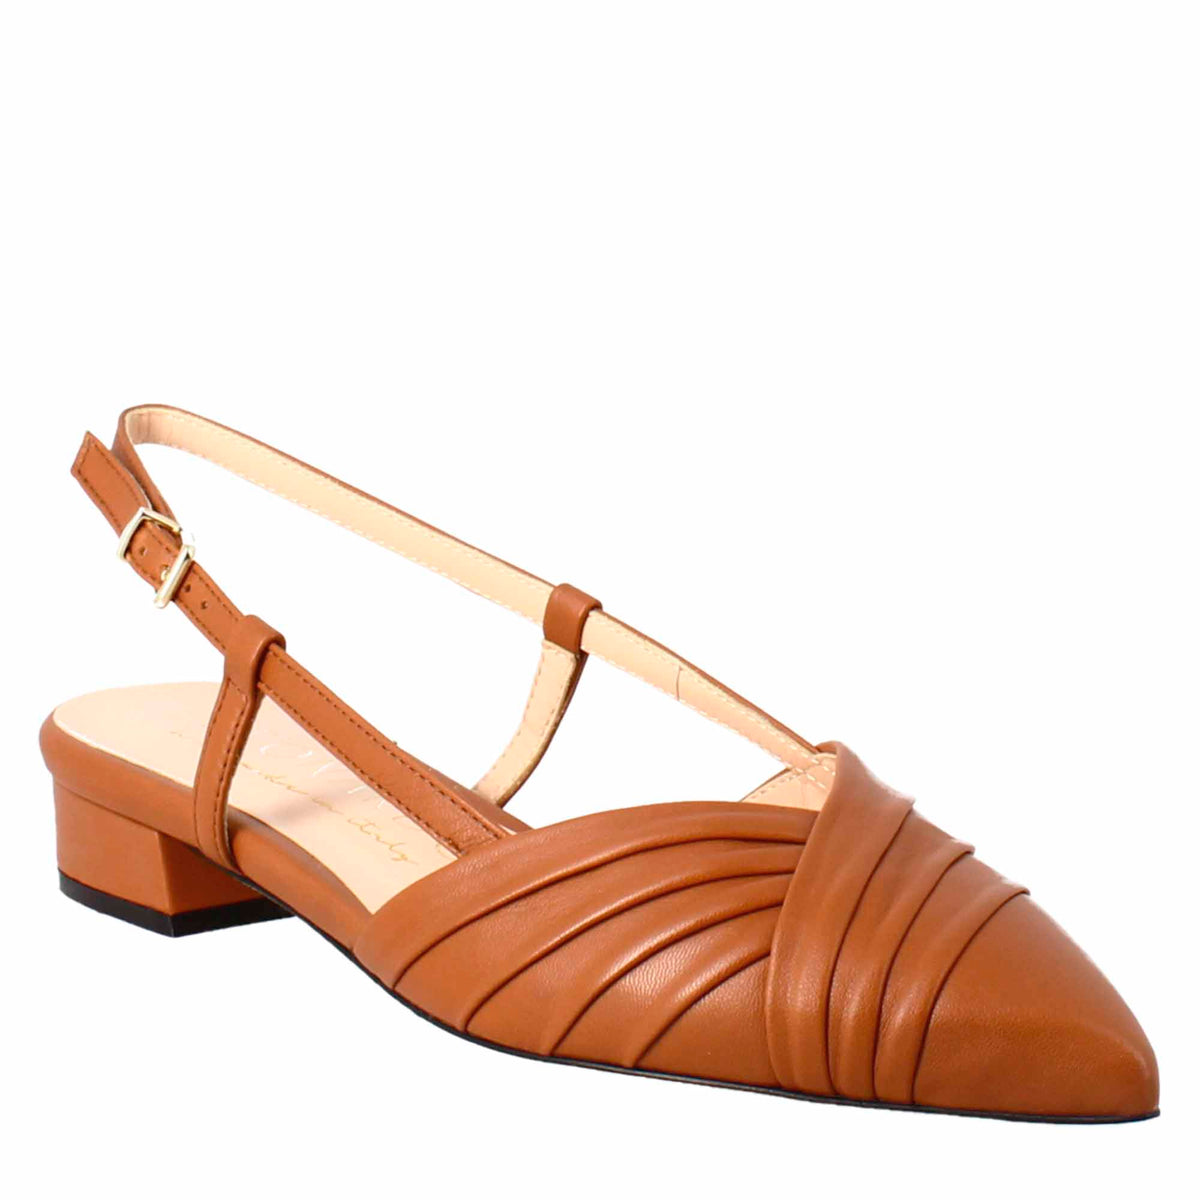 Woman's pointed toe medium heel closed sandal in brown pleated leather